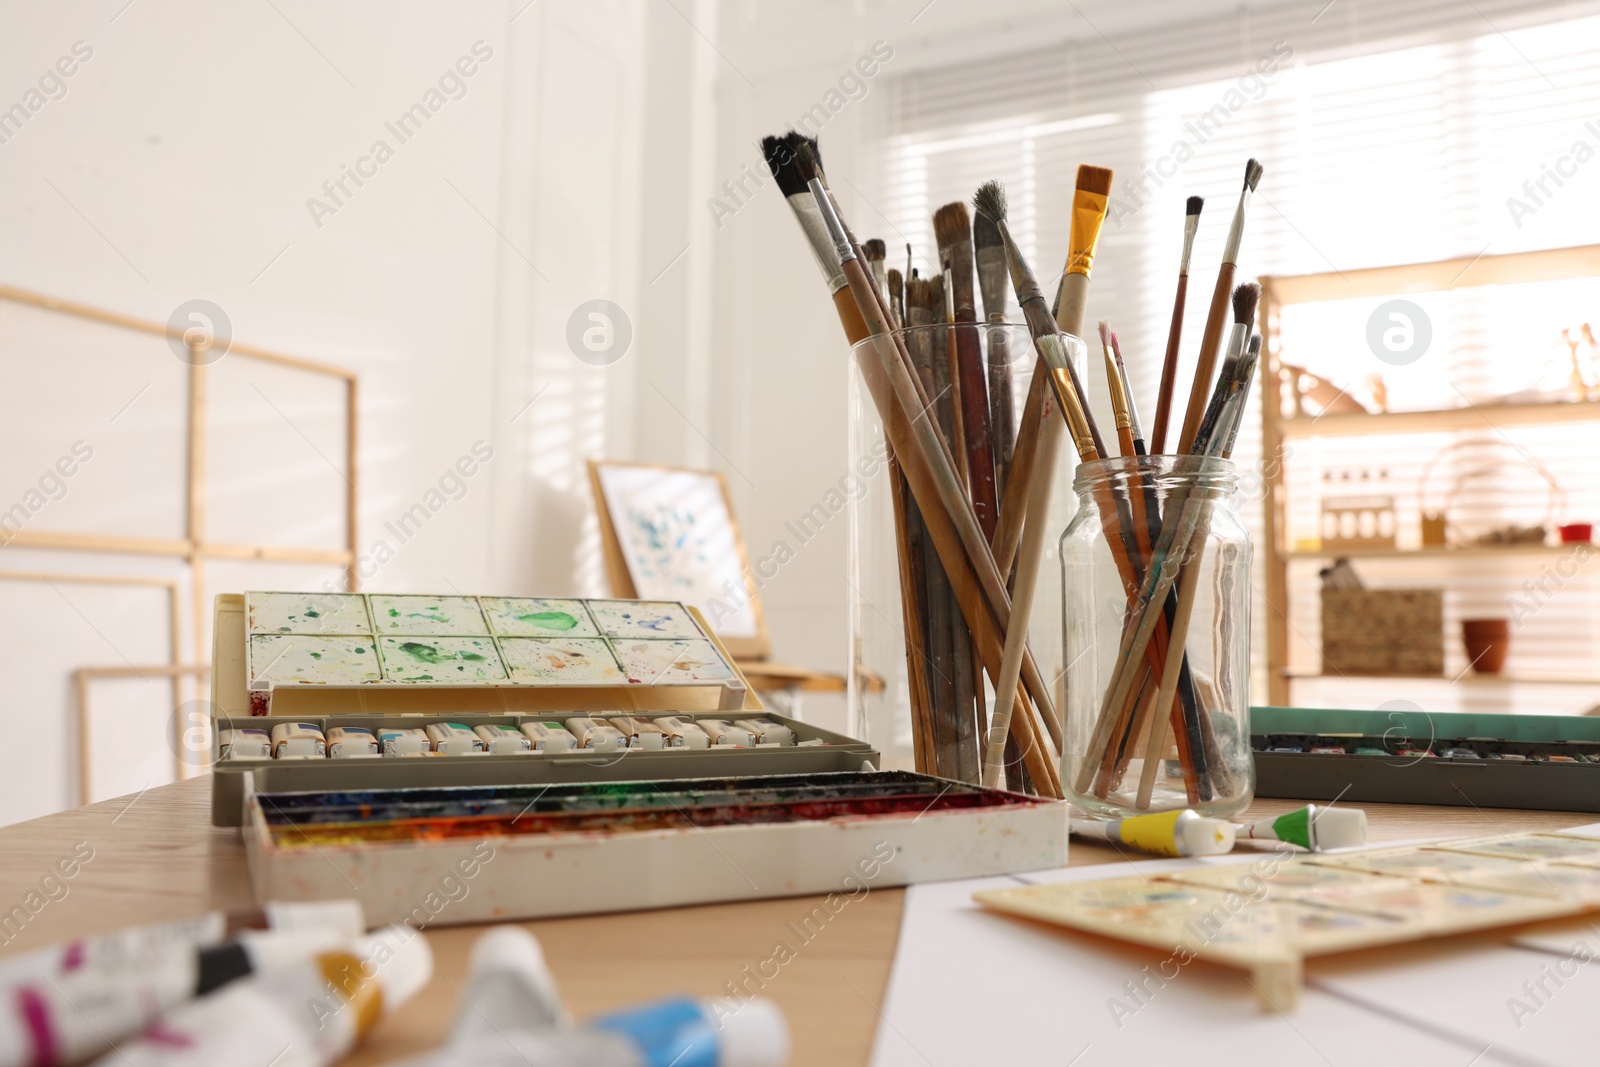 Photo of Different brushes and colorful paints on wooden table in studio. Artist's workplace